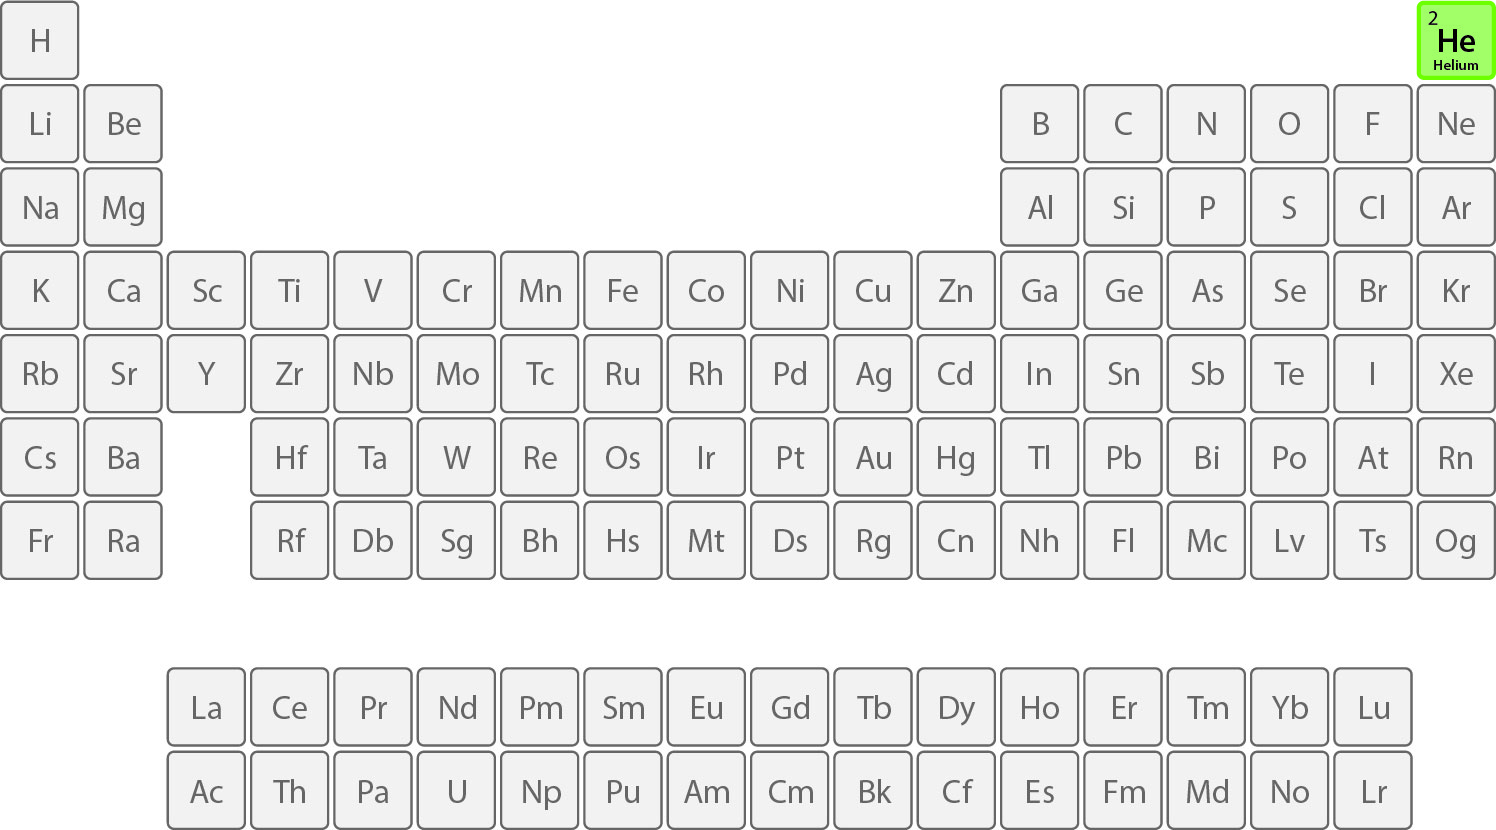 Helium on the periodic table